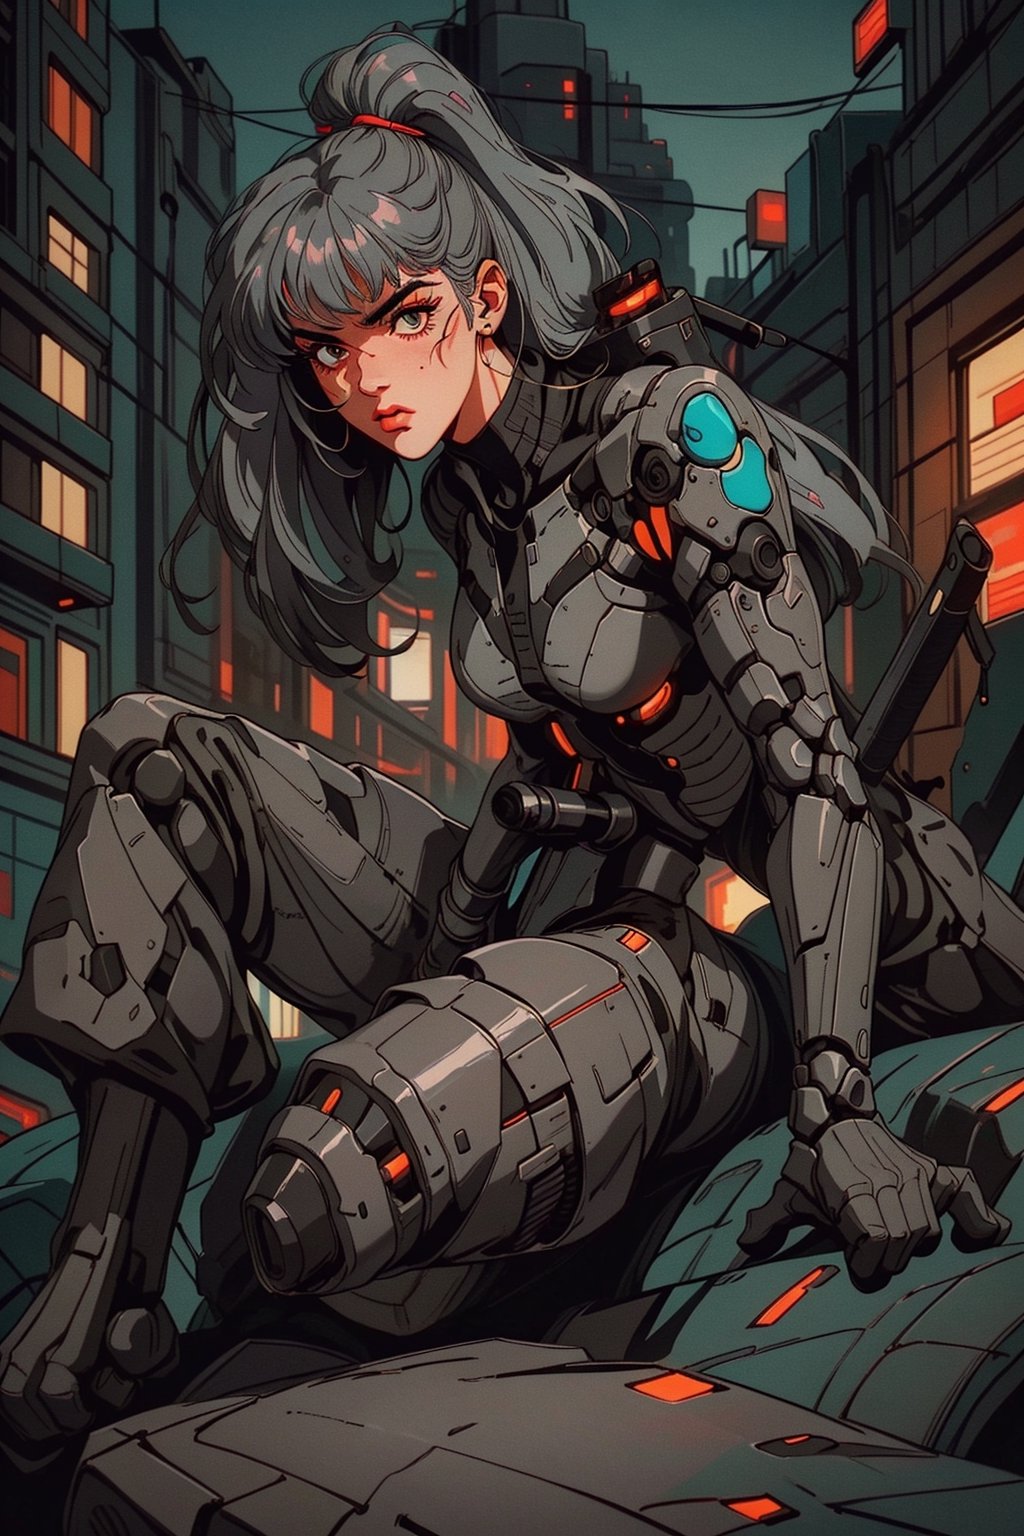 ((90s style)) Create an image of a 1girl  sleek ((GRAY hair)), advanced mechanical joints, designed as a futuristic defender. Show him in a dynamic pose, ready to protect a high-tech cityscape against imminent threats, utilizing his enhanced abilities,90s style,retro,,1990s (style),90s